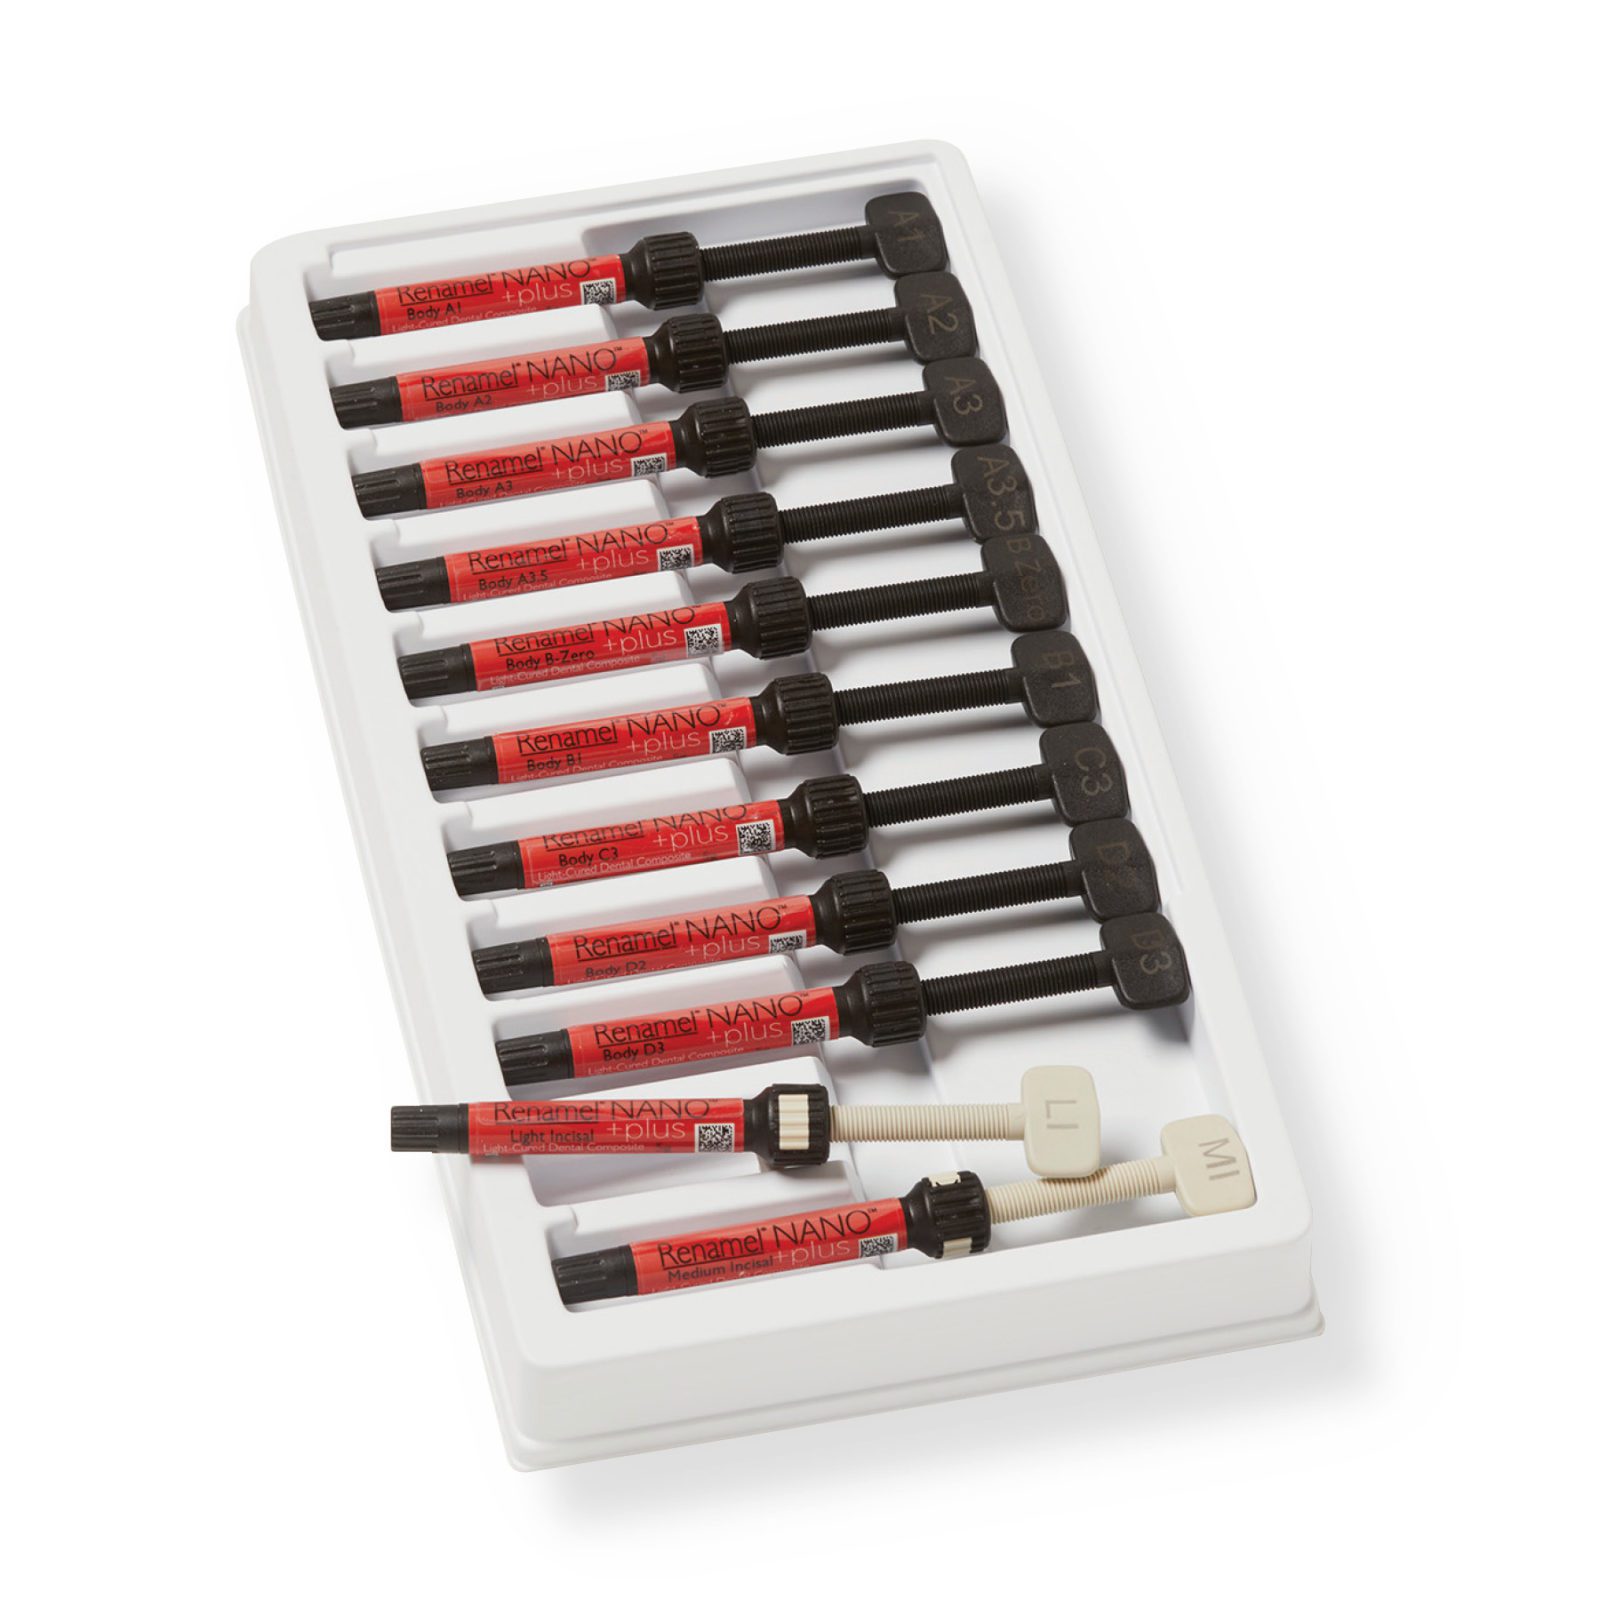 New Porcelain Repair Kit from Cosmedent